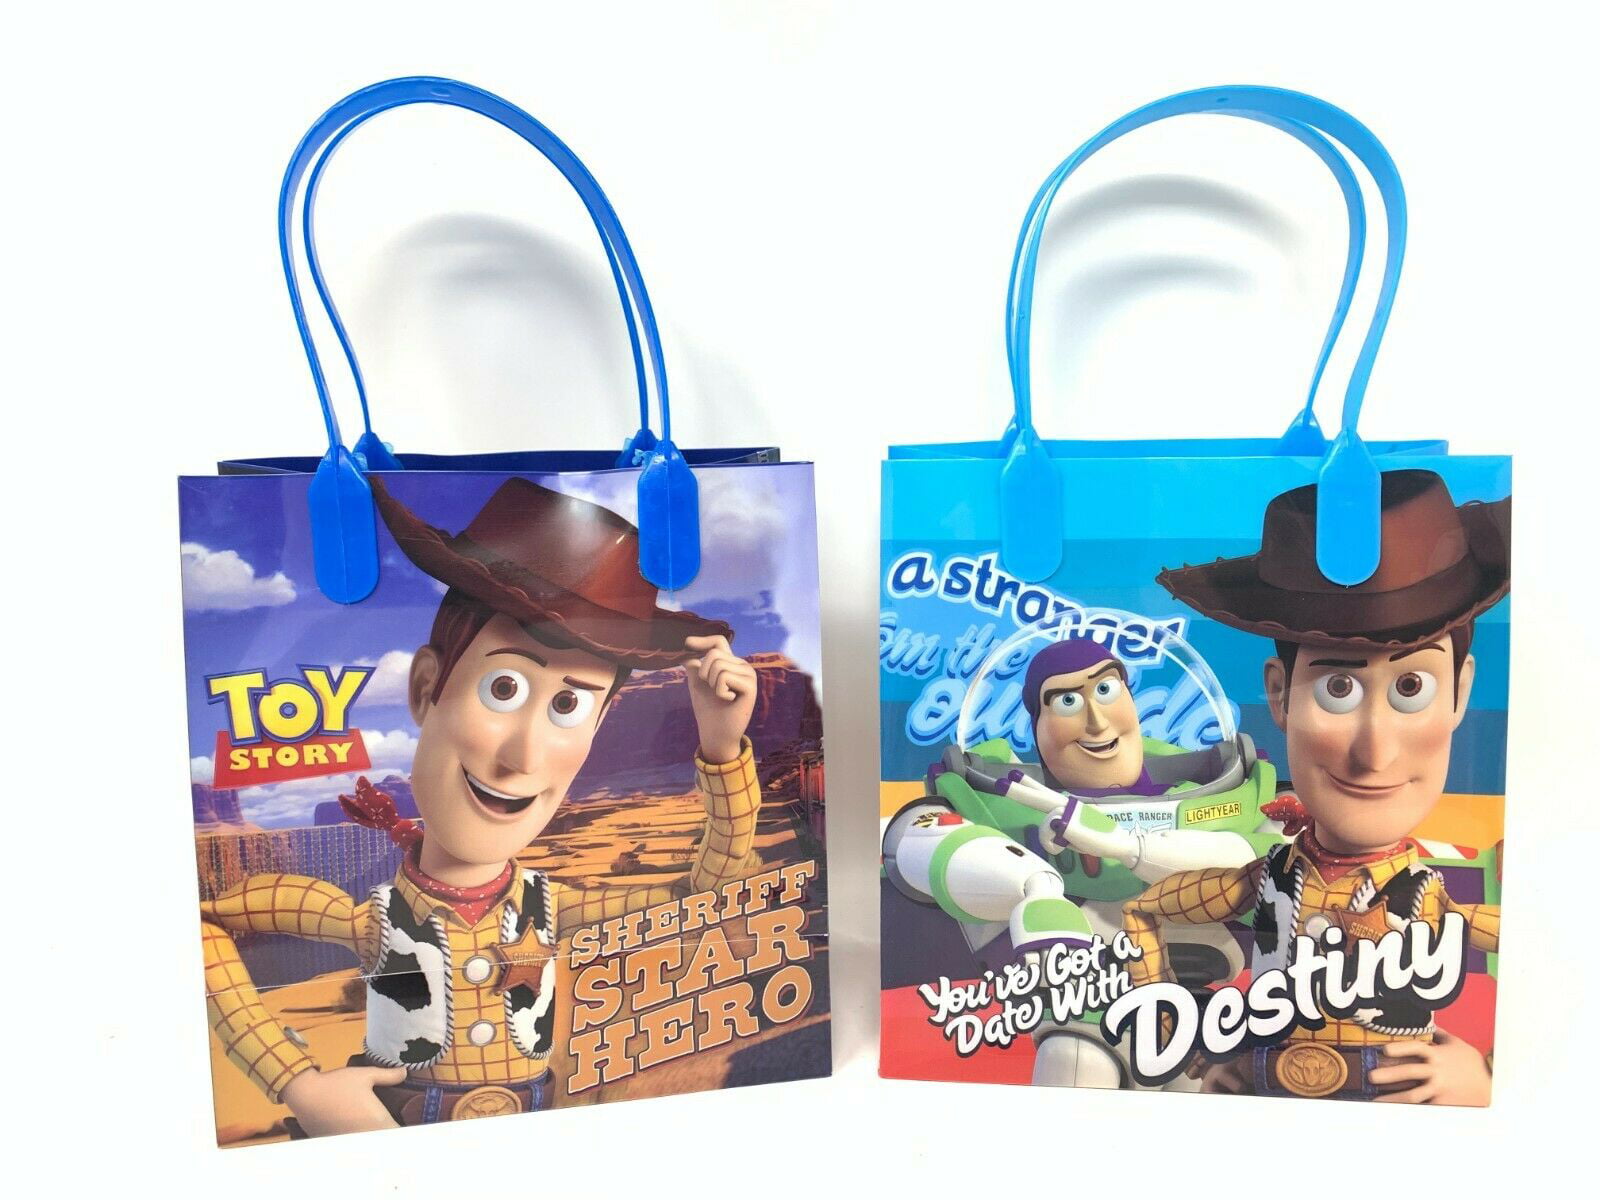 Disney Pixar Toy Story Party Favor Goodie Gift Bag 12 Packs 6 Small Size by Toy Story 